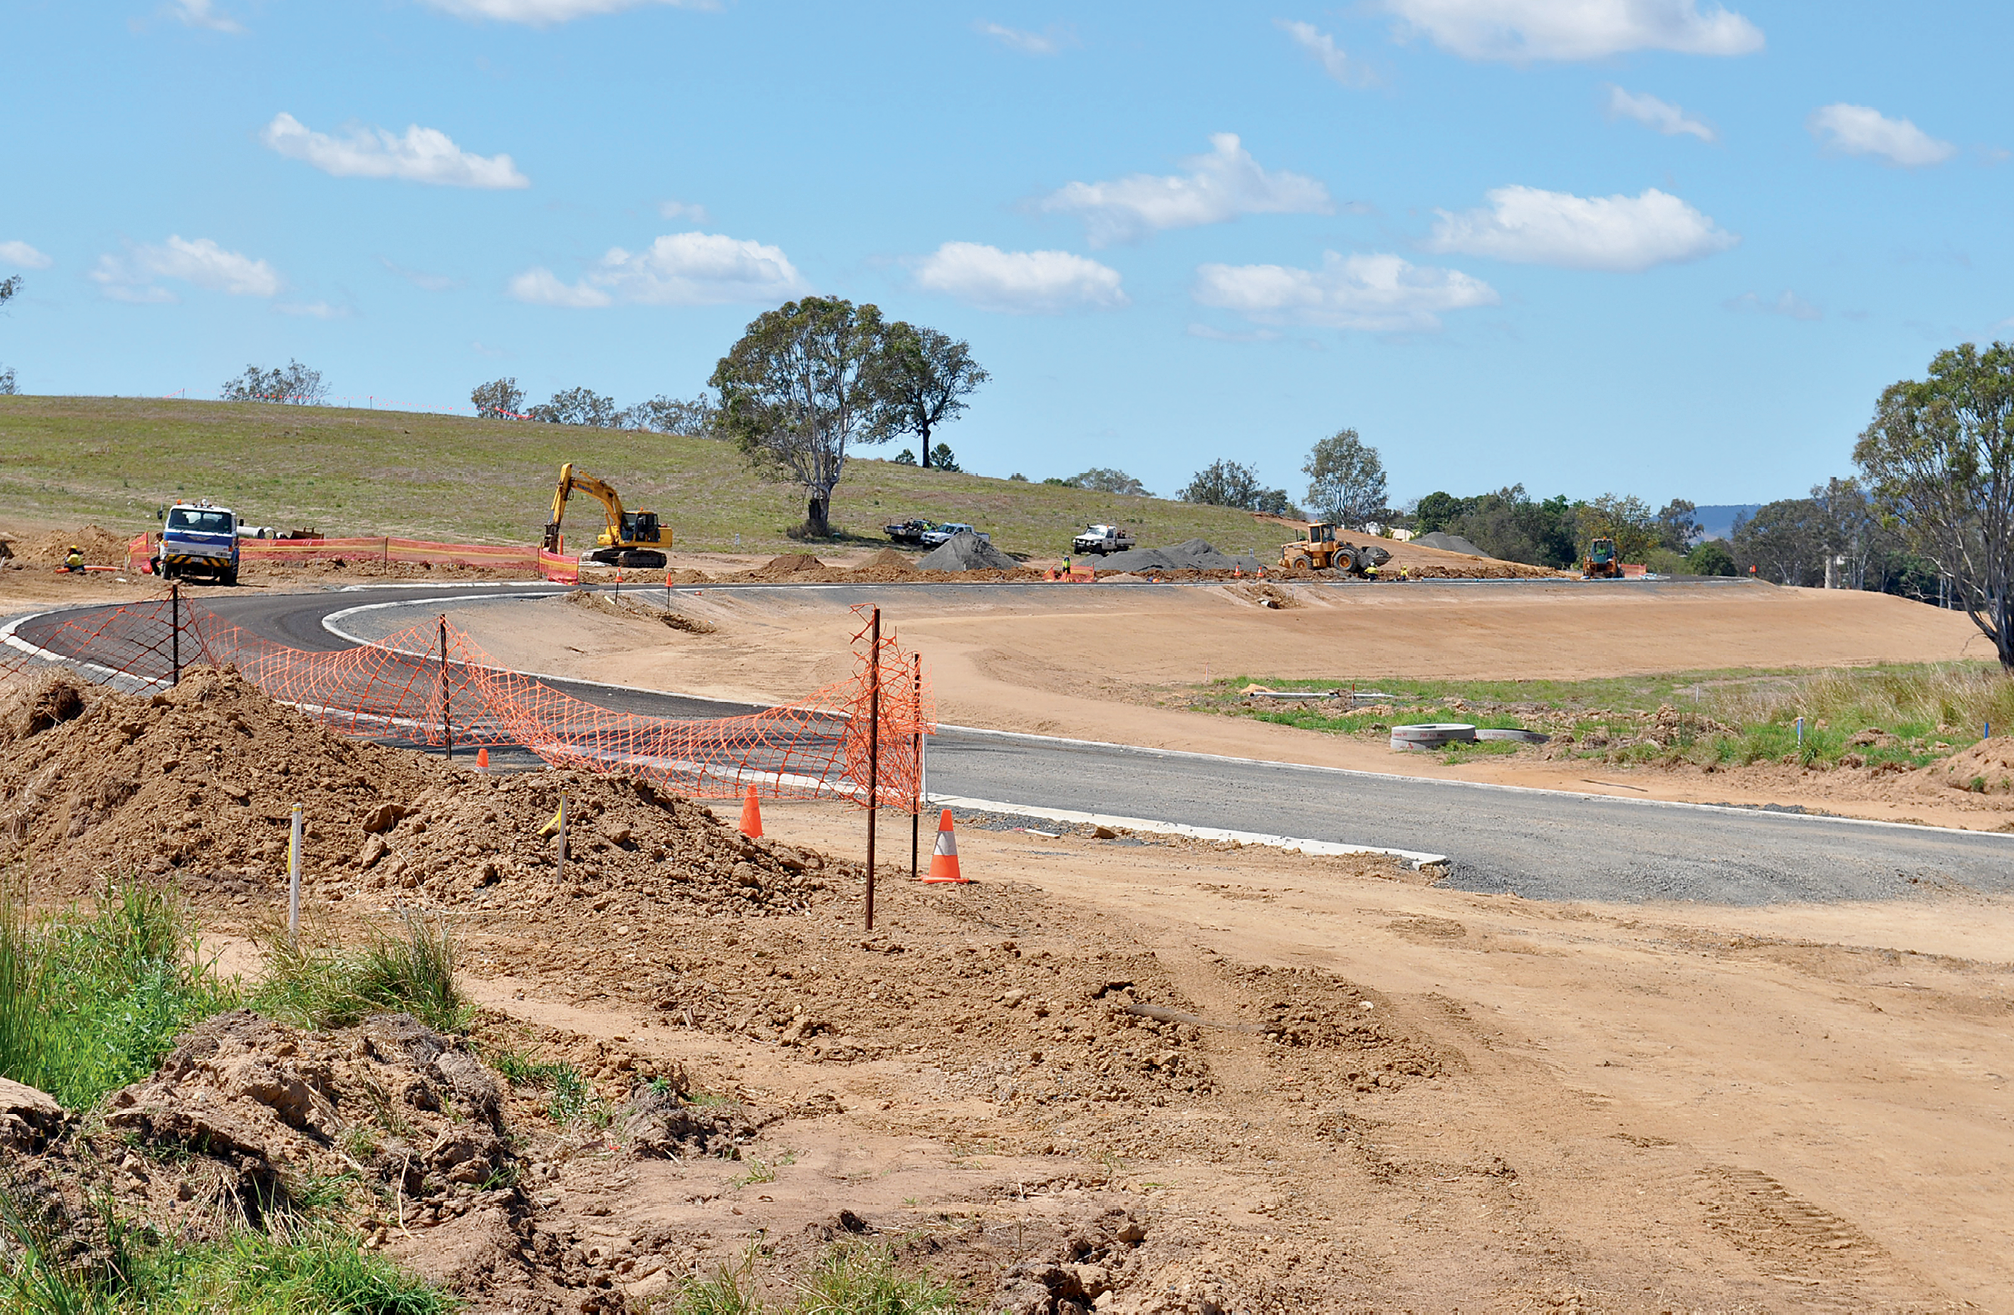 Photograph of road construction in the countryside. Piles of dirt are next to orange netting and traffic cones. A truck, digger and cars are in the background near a gum tree.